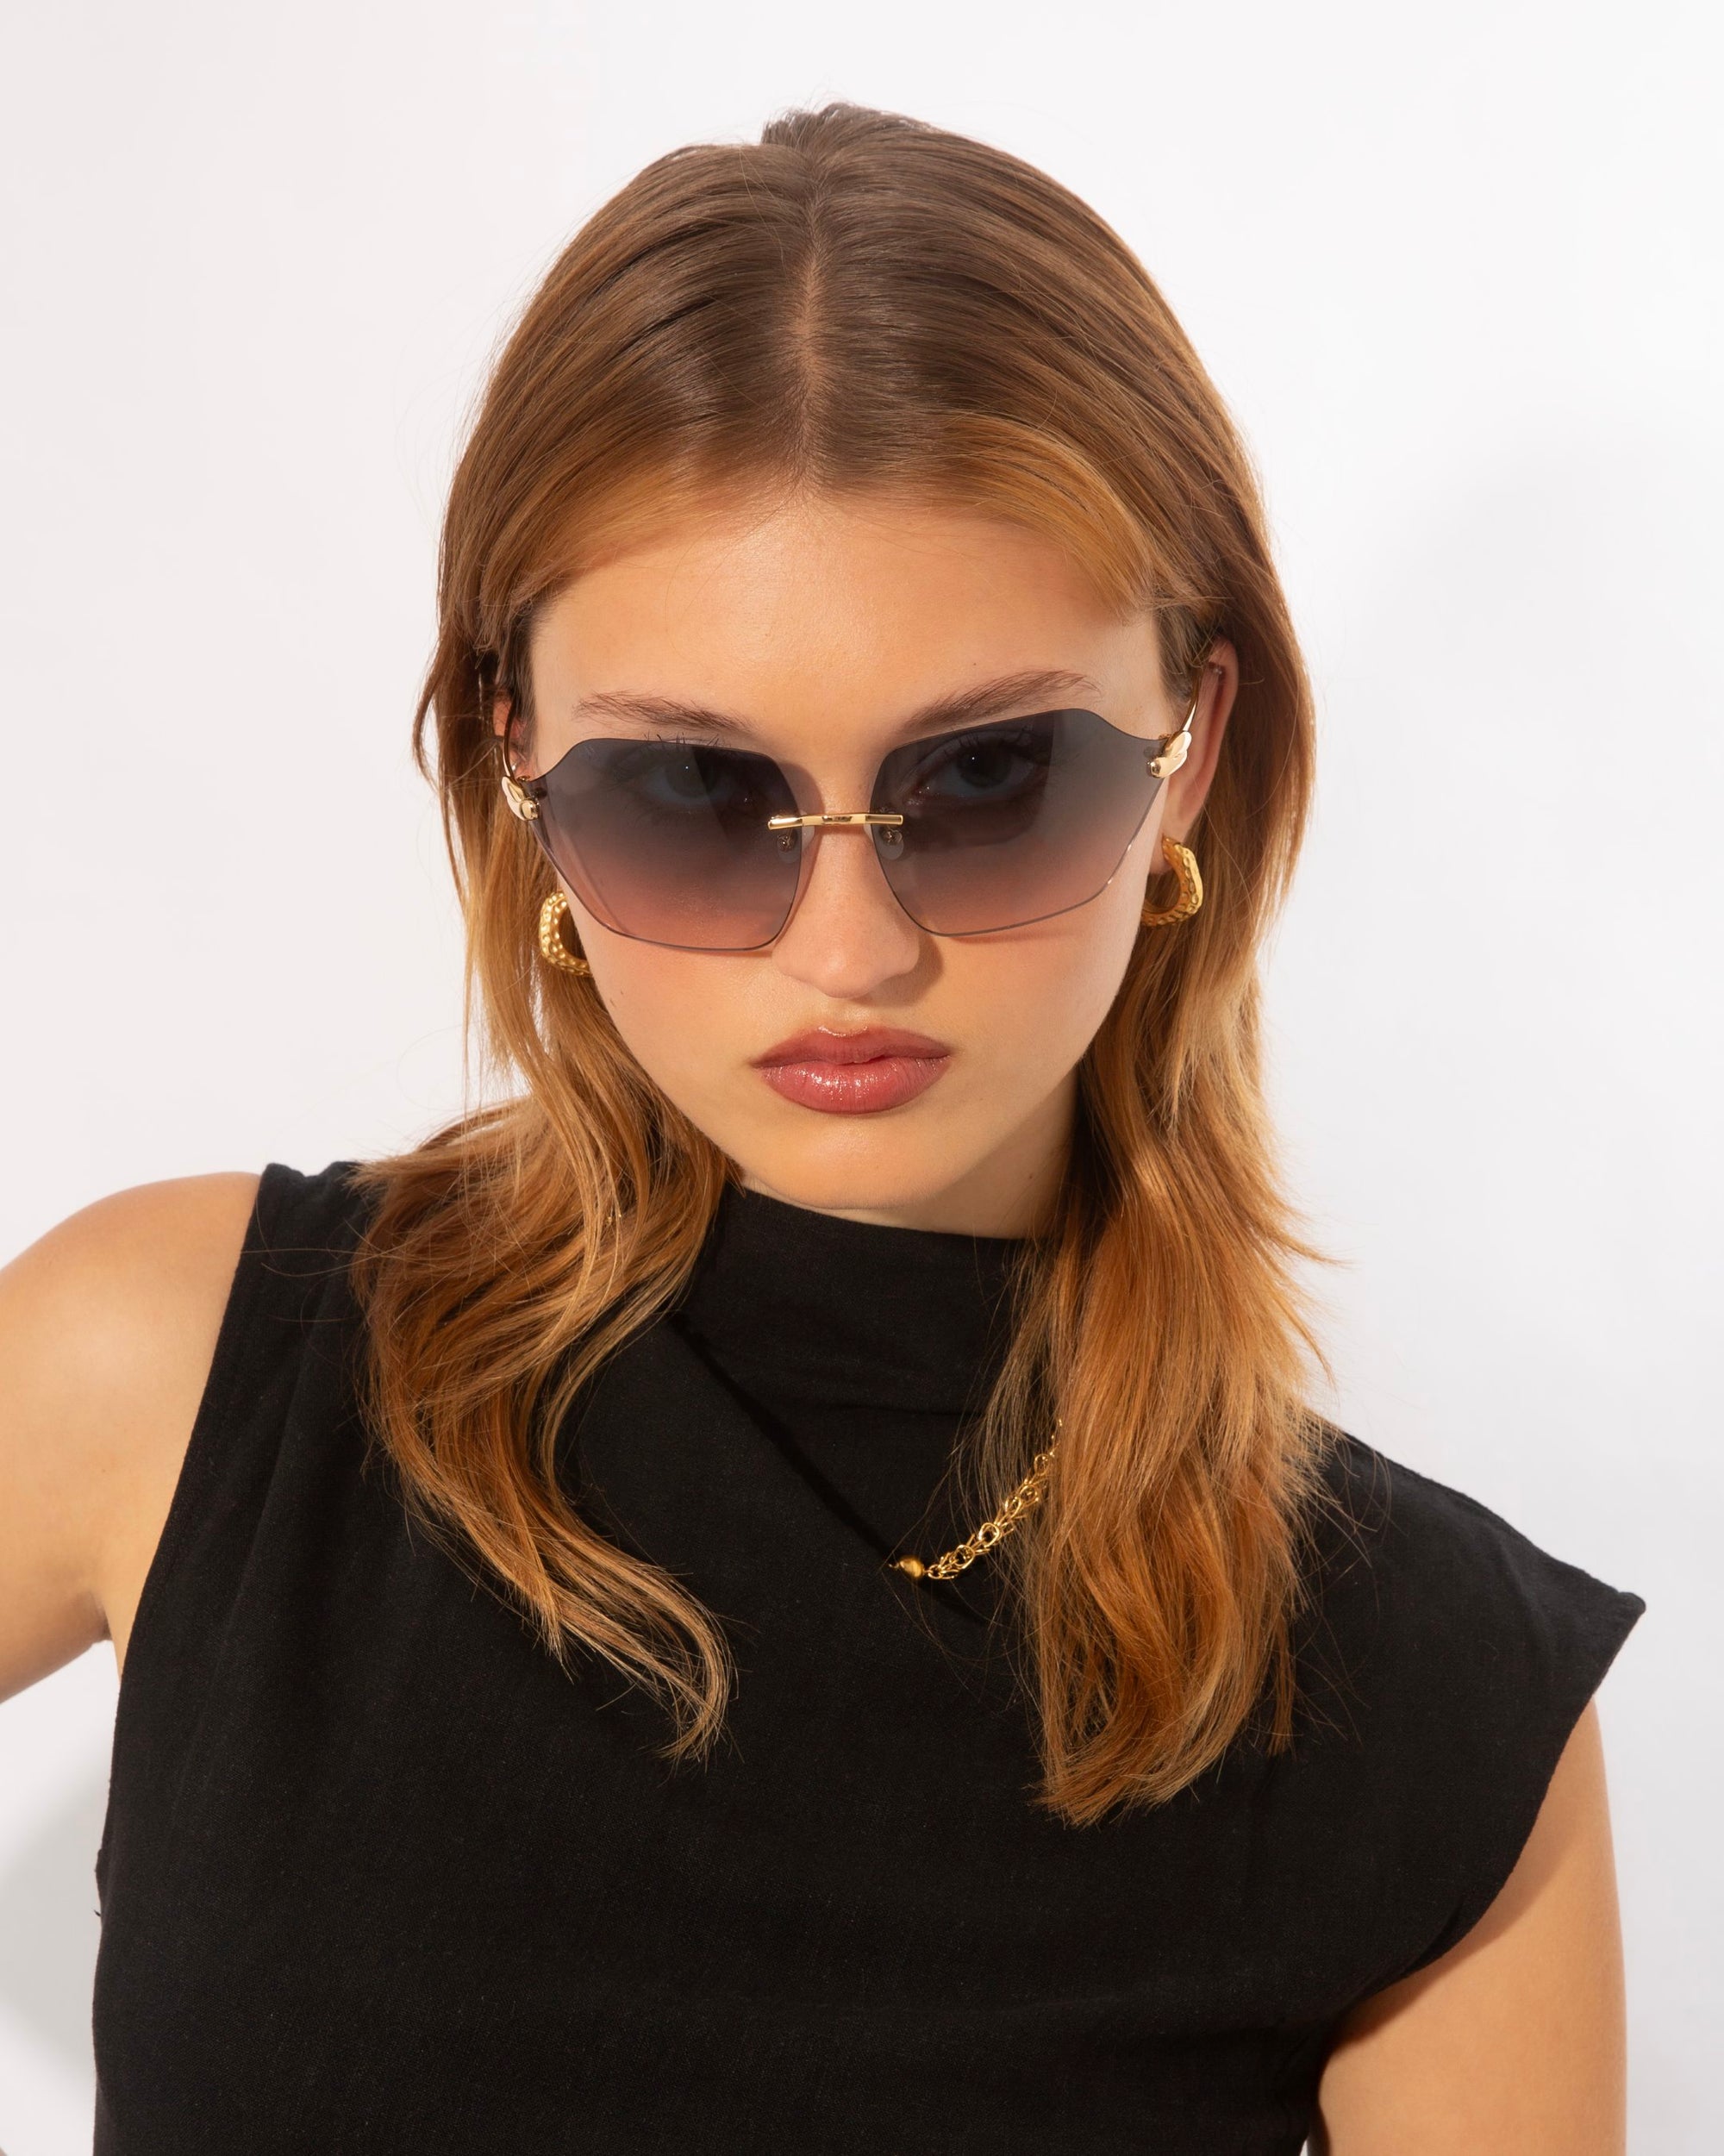 A person with light brown hair wearing large, dark sunglasses (Serpent II by For Art's Sake®) with frameless wrap lenses and gold earrings looks directly at the camera. They are dressed in a sleeveless black top against a plain white background.